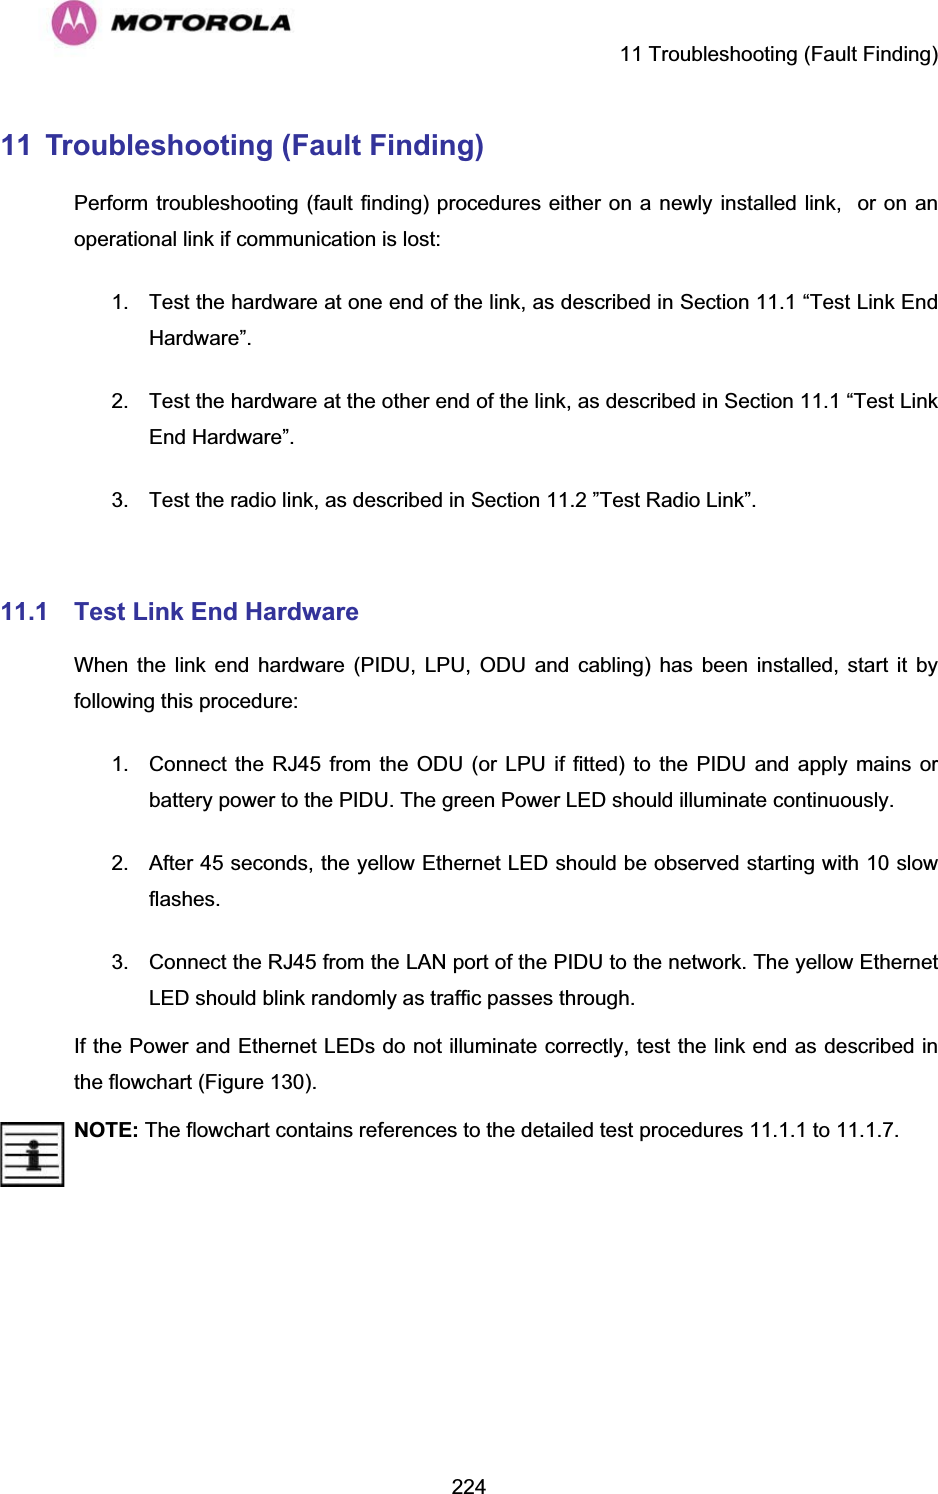     11 Troubleshooting (Fault Finding)  22411  Troubleshooting (Fault Finding)  Perform troubleshooting (fault finding) procedures either on a newly installed link,  or on an operational link if communication is lost: 1.  Test the hardware at one end of the link, as described in Section 11.1 “Test Link End Hardware”. 2.  Test the hardware at the other end of the link, as described in Section 11.1 “Test Link End Hardware”. 3.  Test the radio link, as described in Section 11.2 ”Test Radio Link”.  11.1 Test Link End Hardware When the link end hardware (PIDU, LPU, ODU and cabling) has been installed, start it by following this procedure: 1.  Connect the RJ45 from the ODU (or LPU if fitted) to the PIDU and apply mains or battery power to the PIDU. The green Power LED should illuminate continuously. 2.  After 45 seconds, the yellow Ethernet LED should be observed starting with 10 slow flashes. 3.  Connect the RJ45 from the LAN port of the PIDU to the network. The yellow Ethernet LED should blink randomly as traffic passes through. If the Power and Ethernet LEDs do not illuminate correctly, test the link end as described in the flowchart (Figure 130). NOTE:The flowchart contains references to the detailed test procedures 11.1.1 to 11.1.7. 